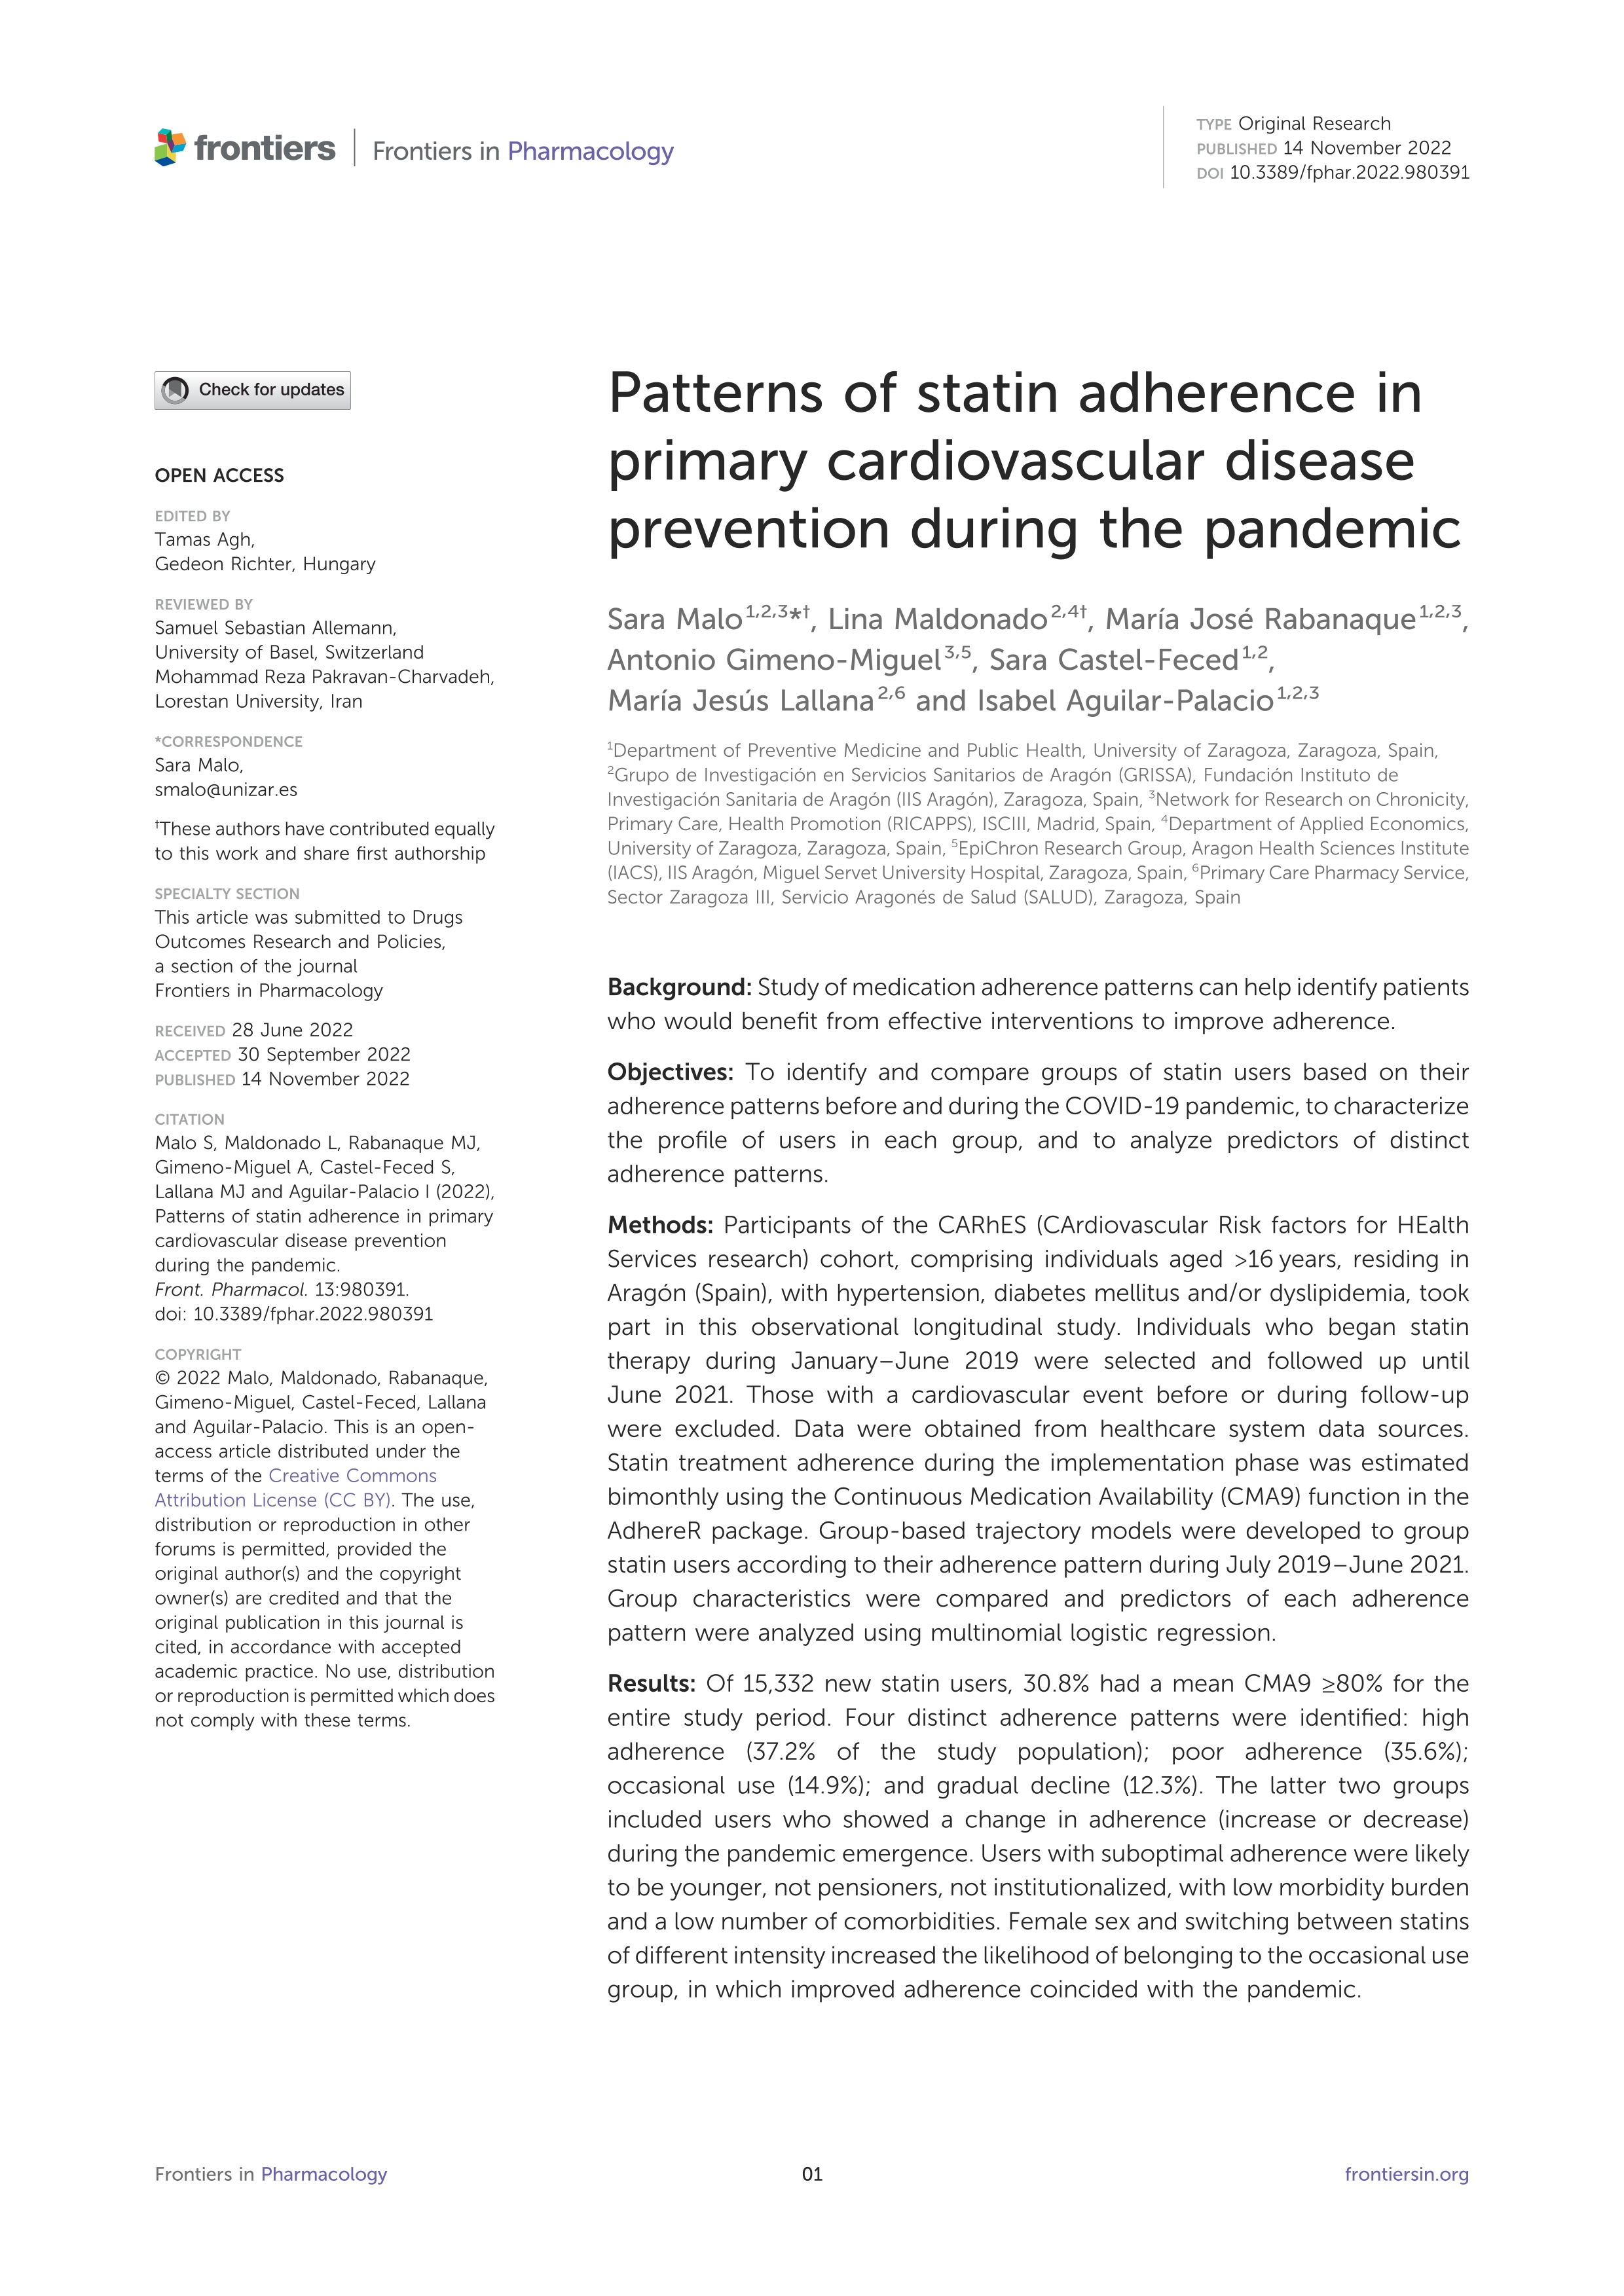 Patterns of statin adherence in primary cardiovascular disease prevention during the pandemic